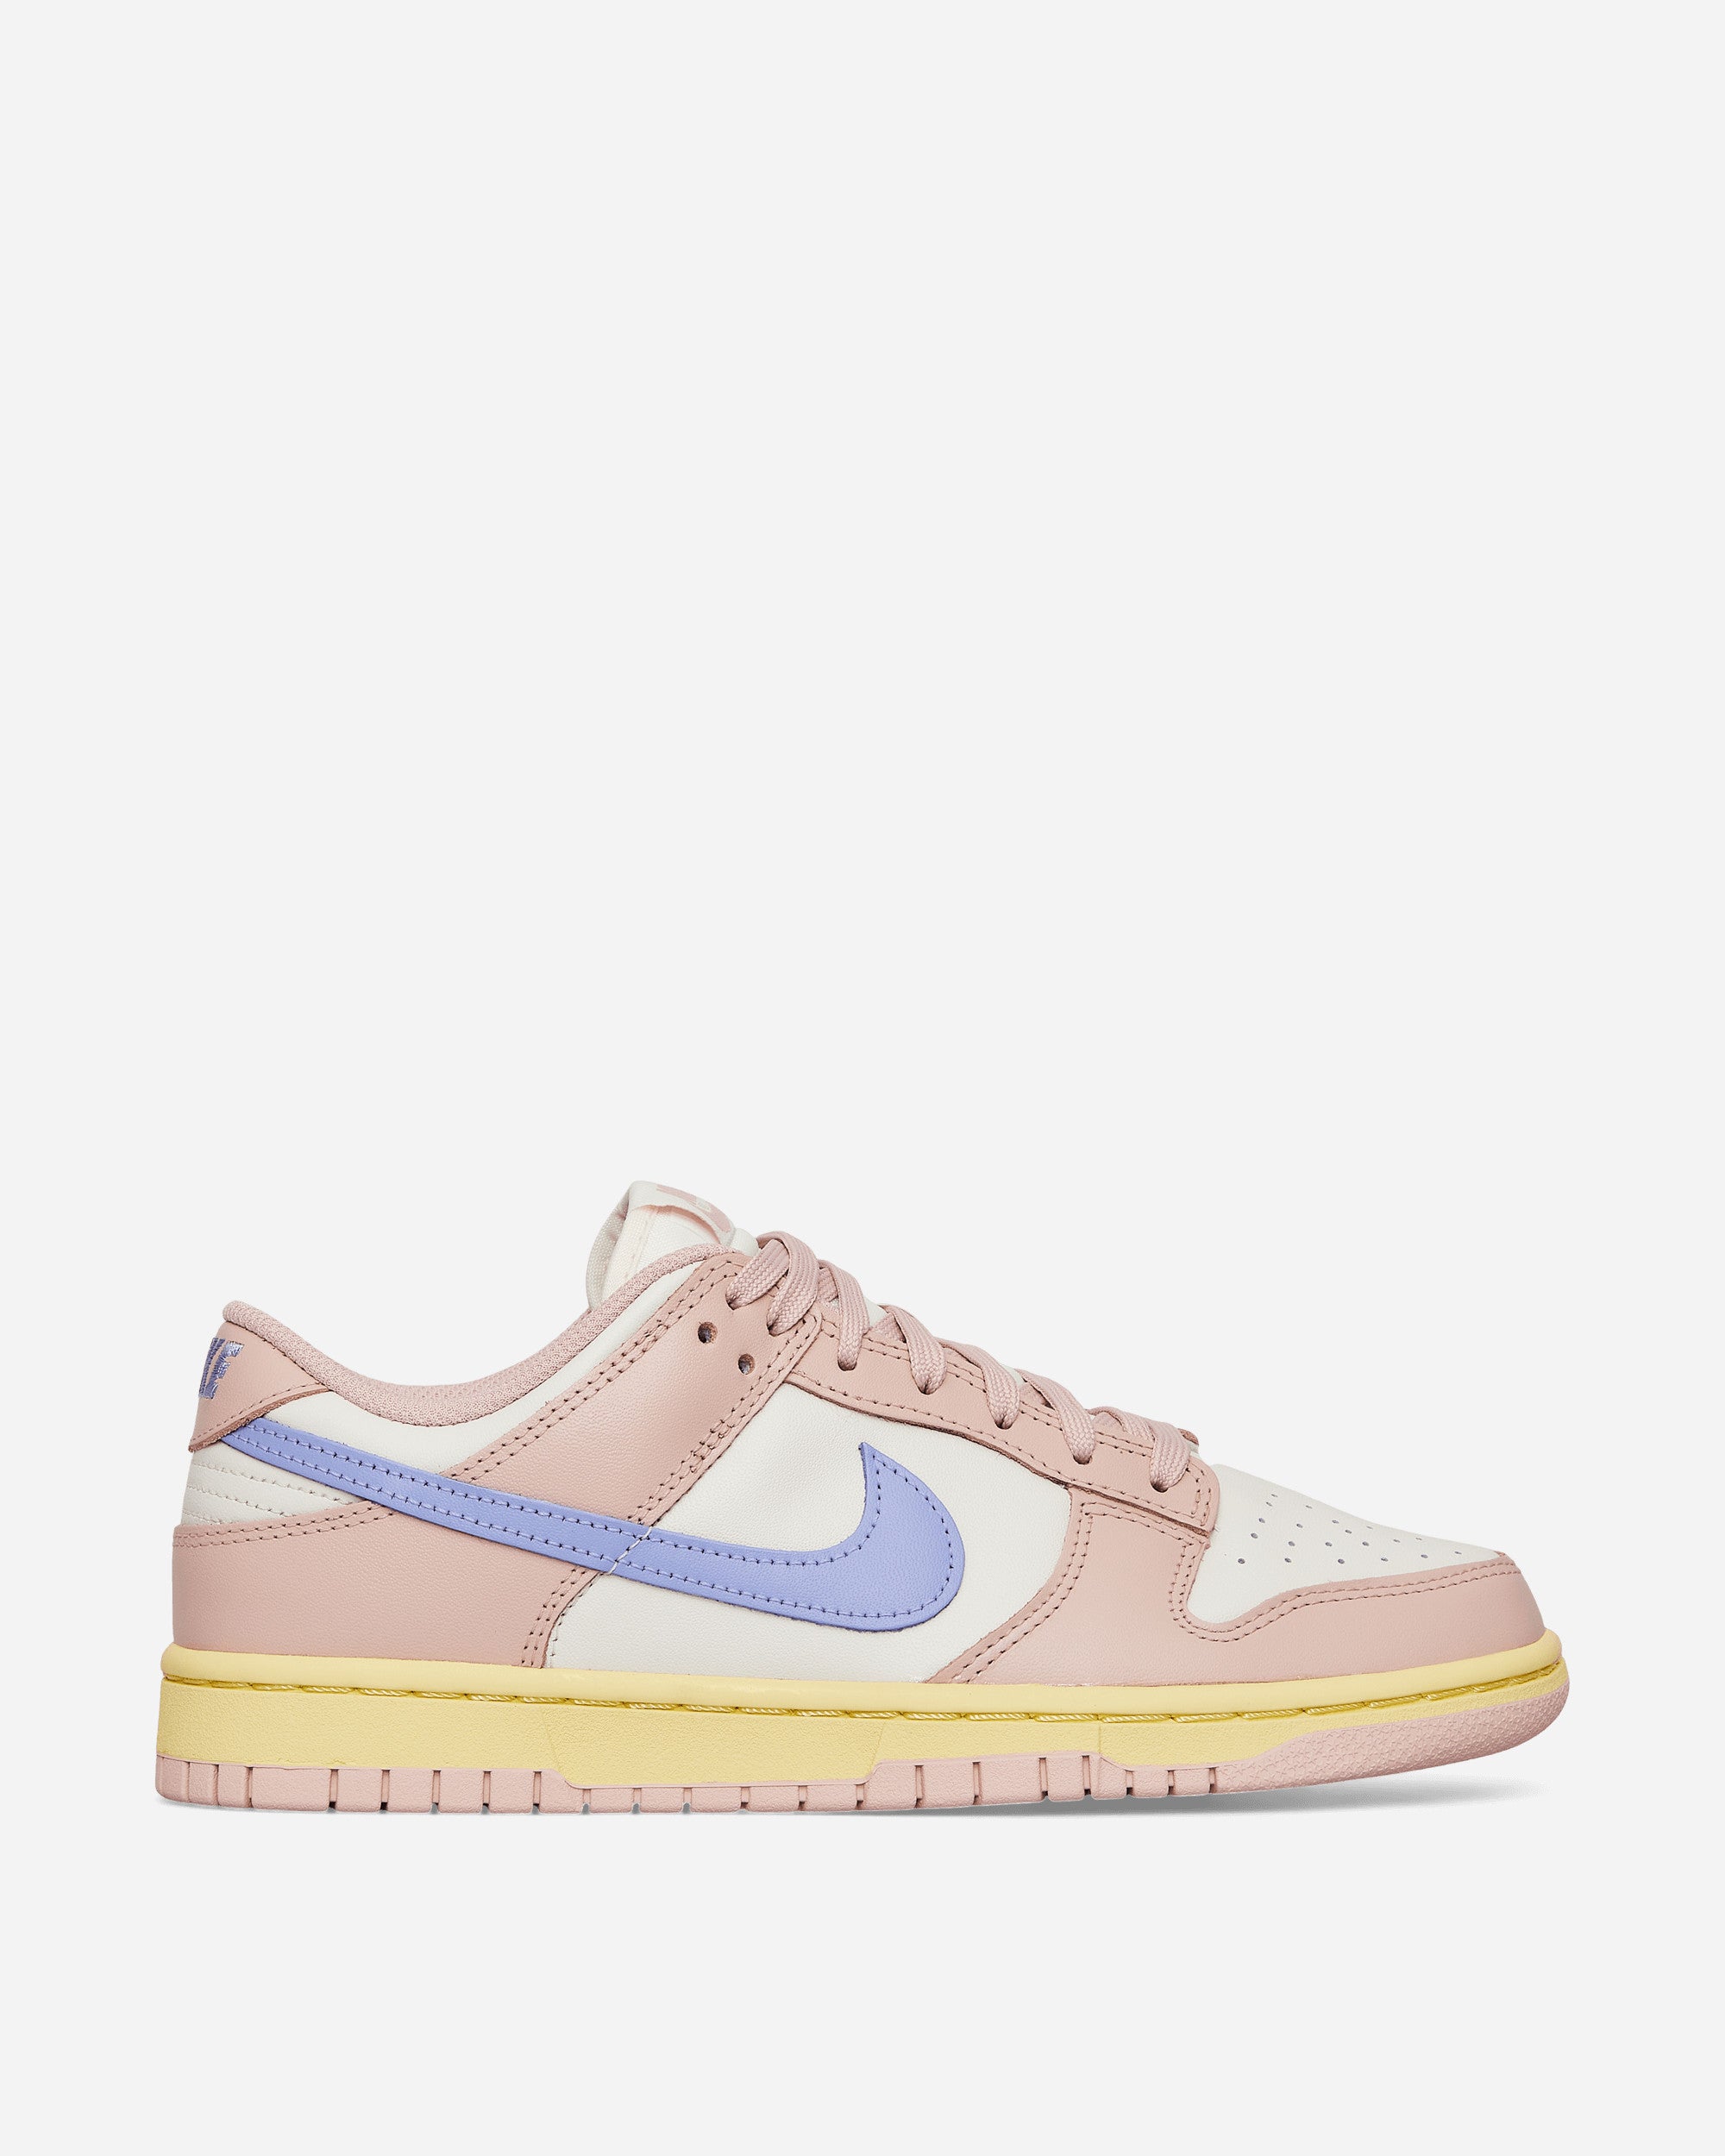 Nike Dunk Pink Oxford/Light Thistle Sneakers Low DD1503-601